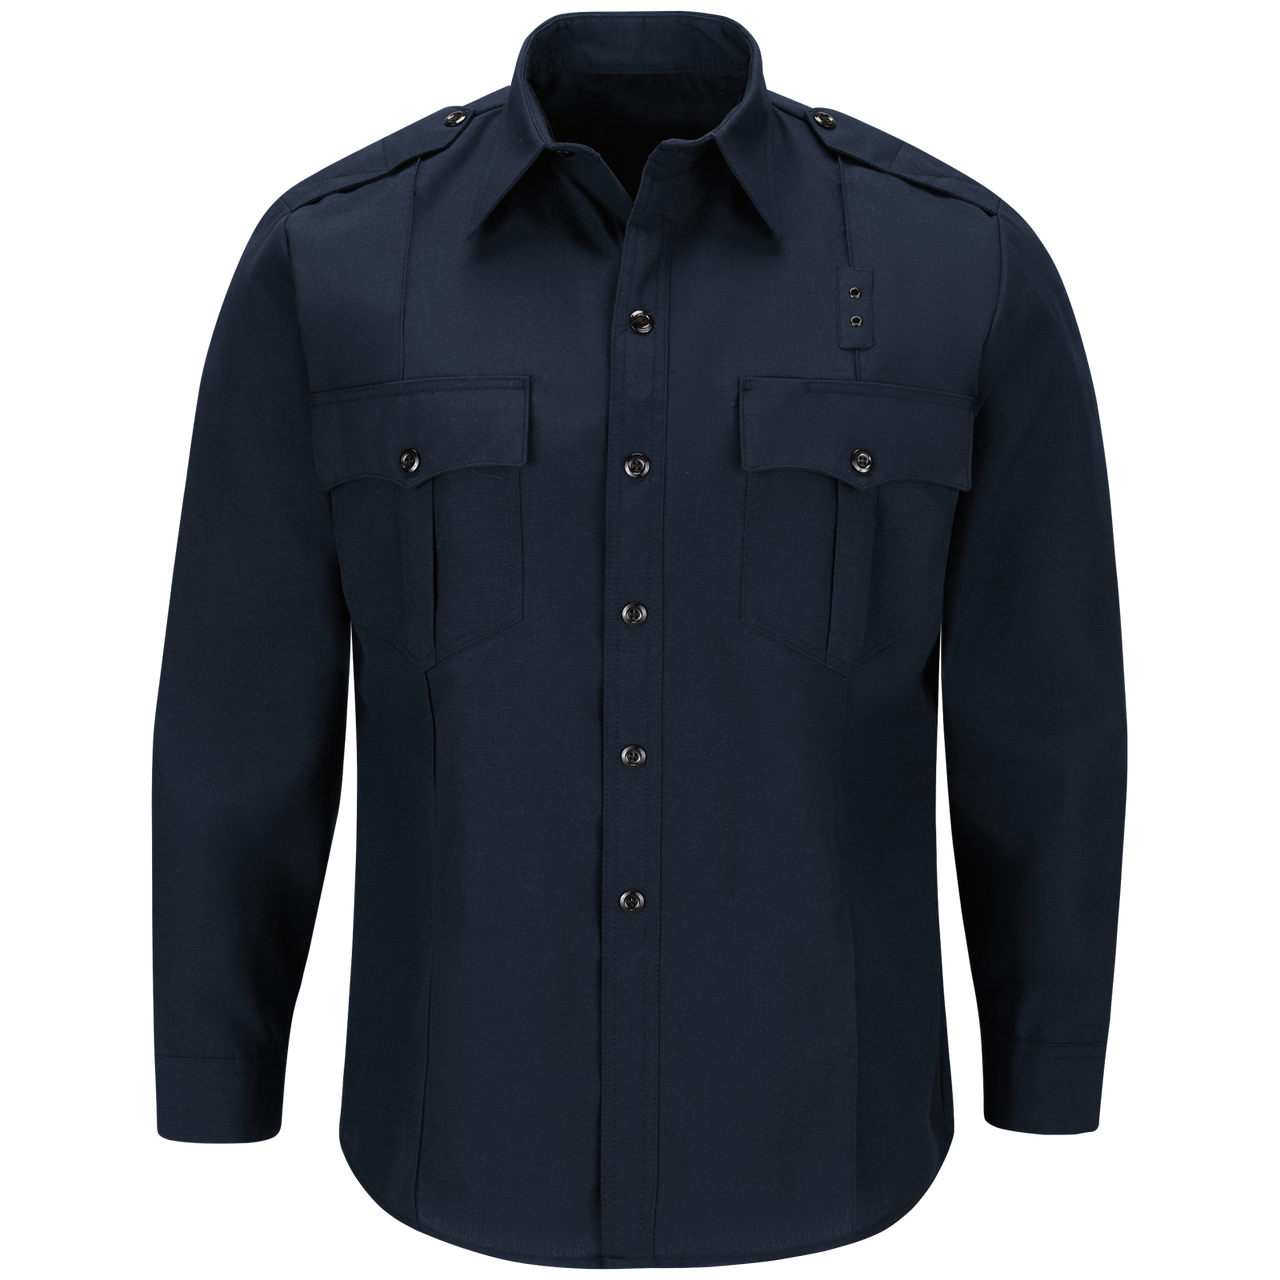 Workrite Men's Classic Long Sleeve Fire Officer Shirt (FSE0) |  The Fire Center | Fuego Fire Center | Store | FIREFIGHTER GEAR | FREE SHIPPING | Our classic Fire Officer's shirt is made with durable, flame-resistant Nomex® IIIA fabric and autoclaved using our proprietary PerfectPress® process to give you a professional appearance that lasts. Featuring details like lined, banded collars and reinforced stitching, designed to support your needs.